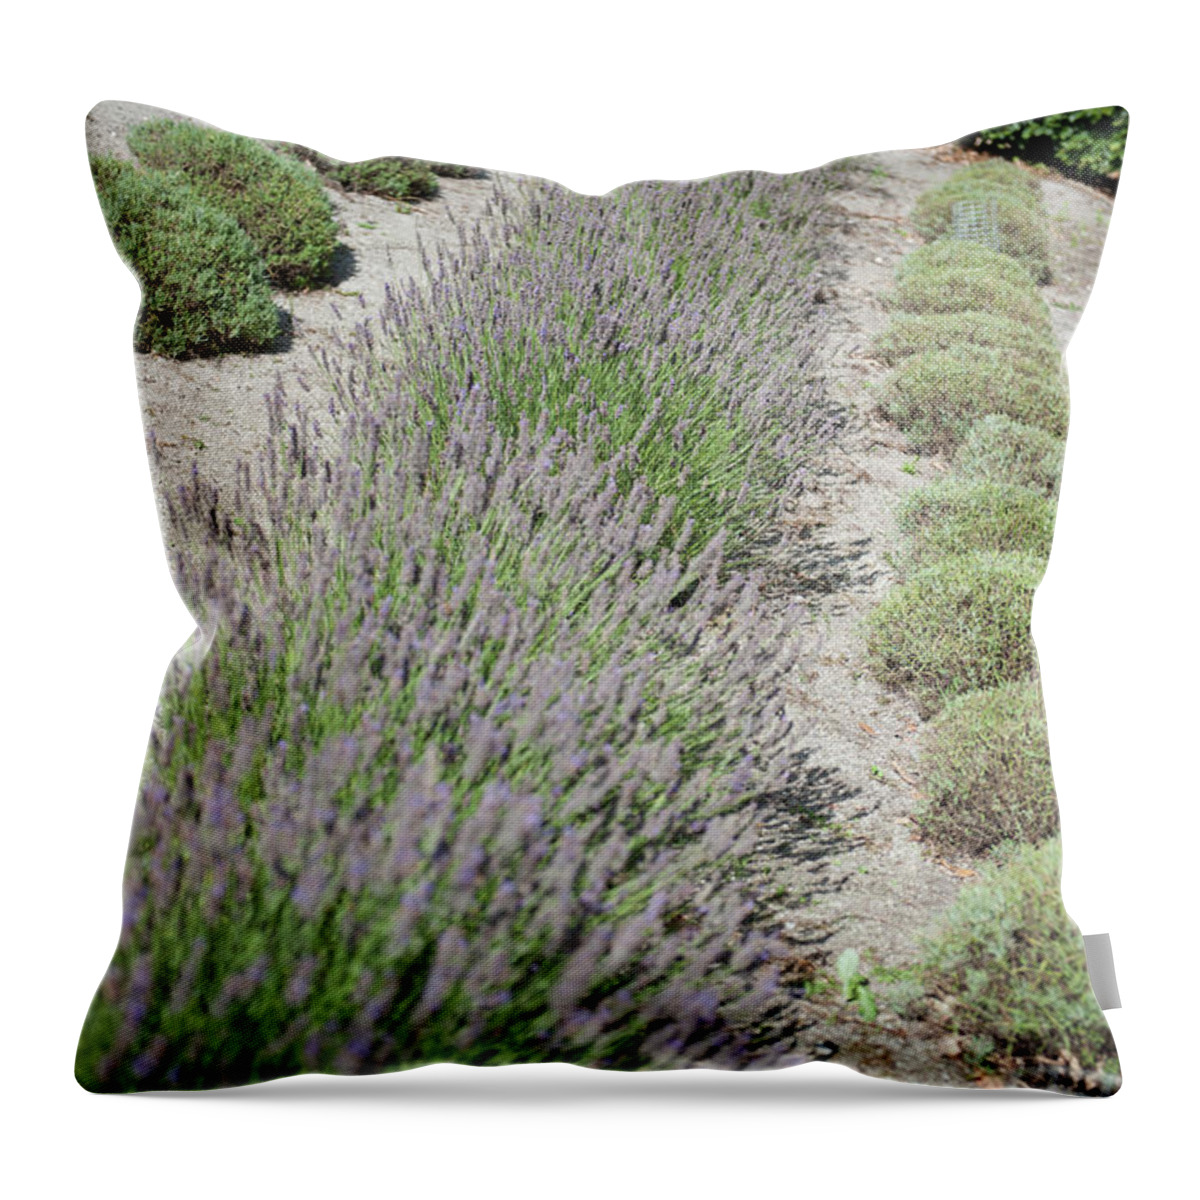 Eden Project Throw Pillow featuring the photograph Lavender Row No. 2 by Helen Jackson